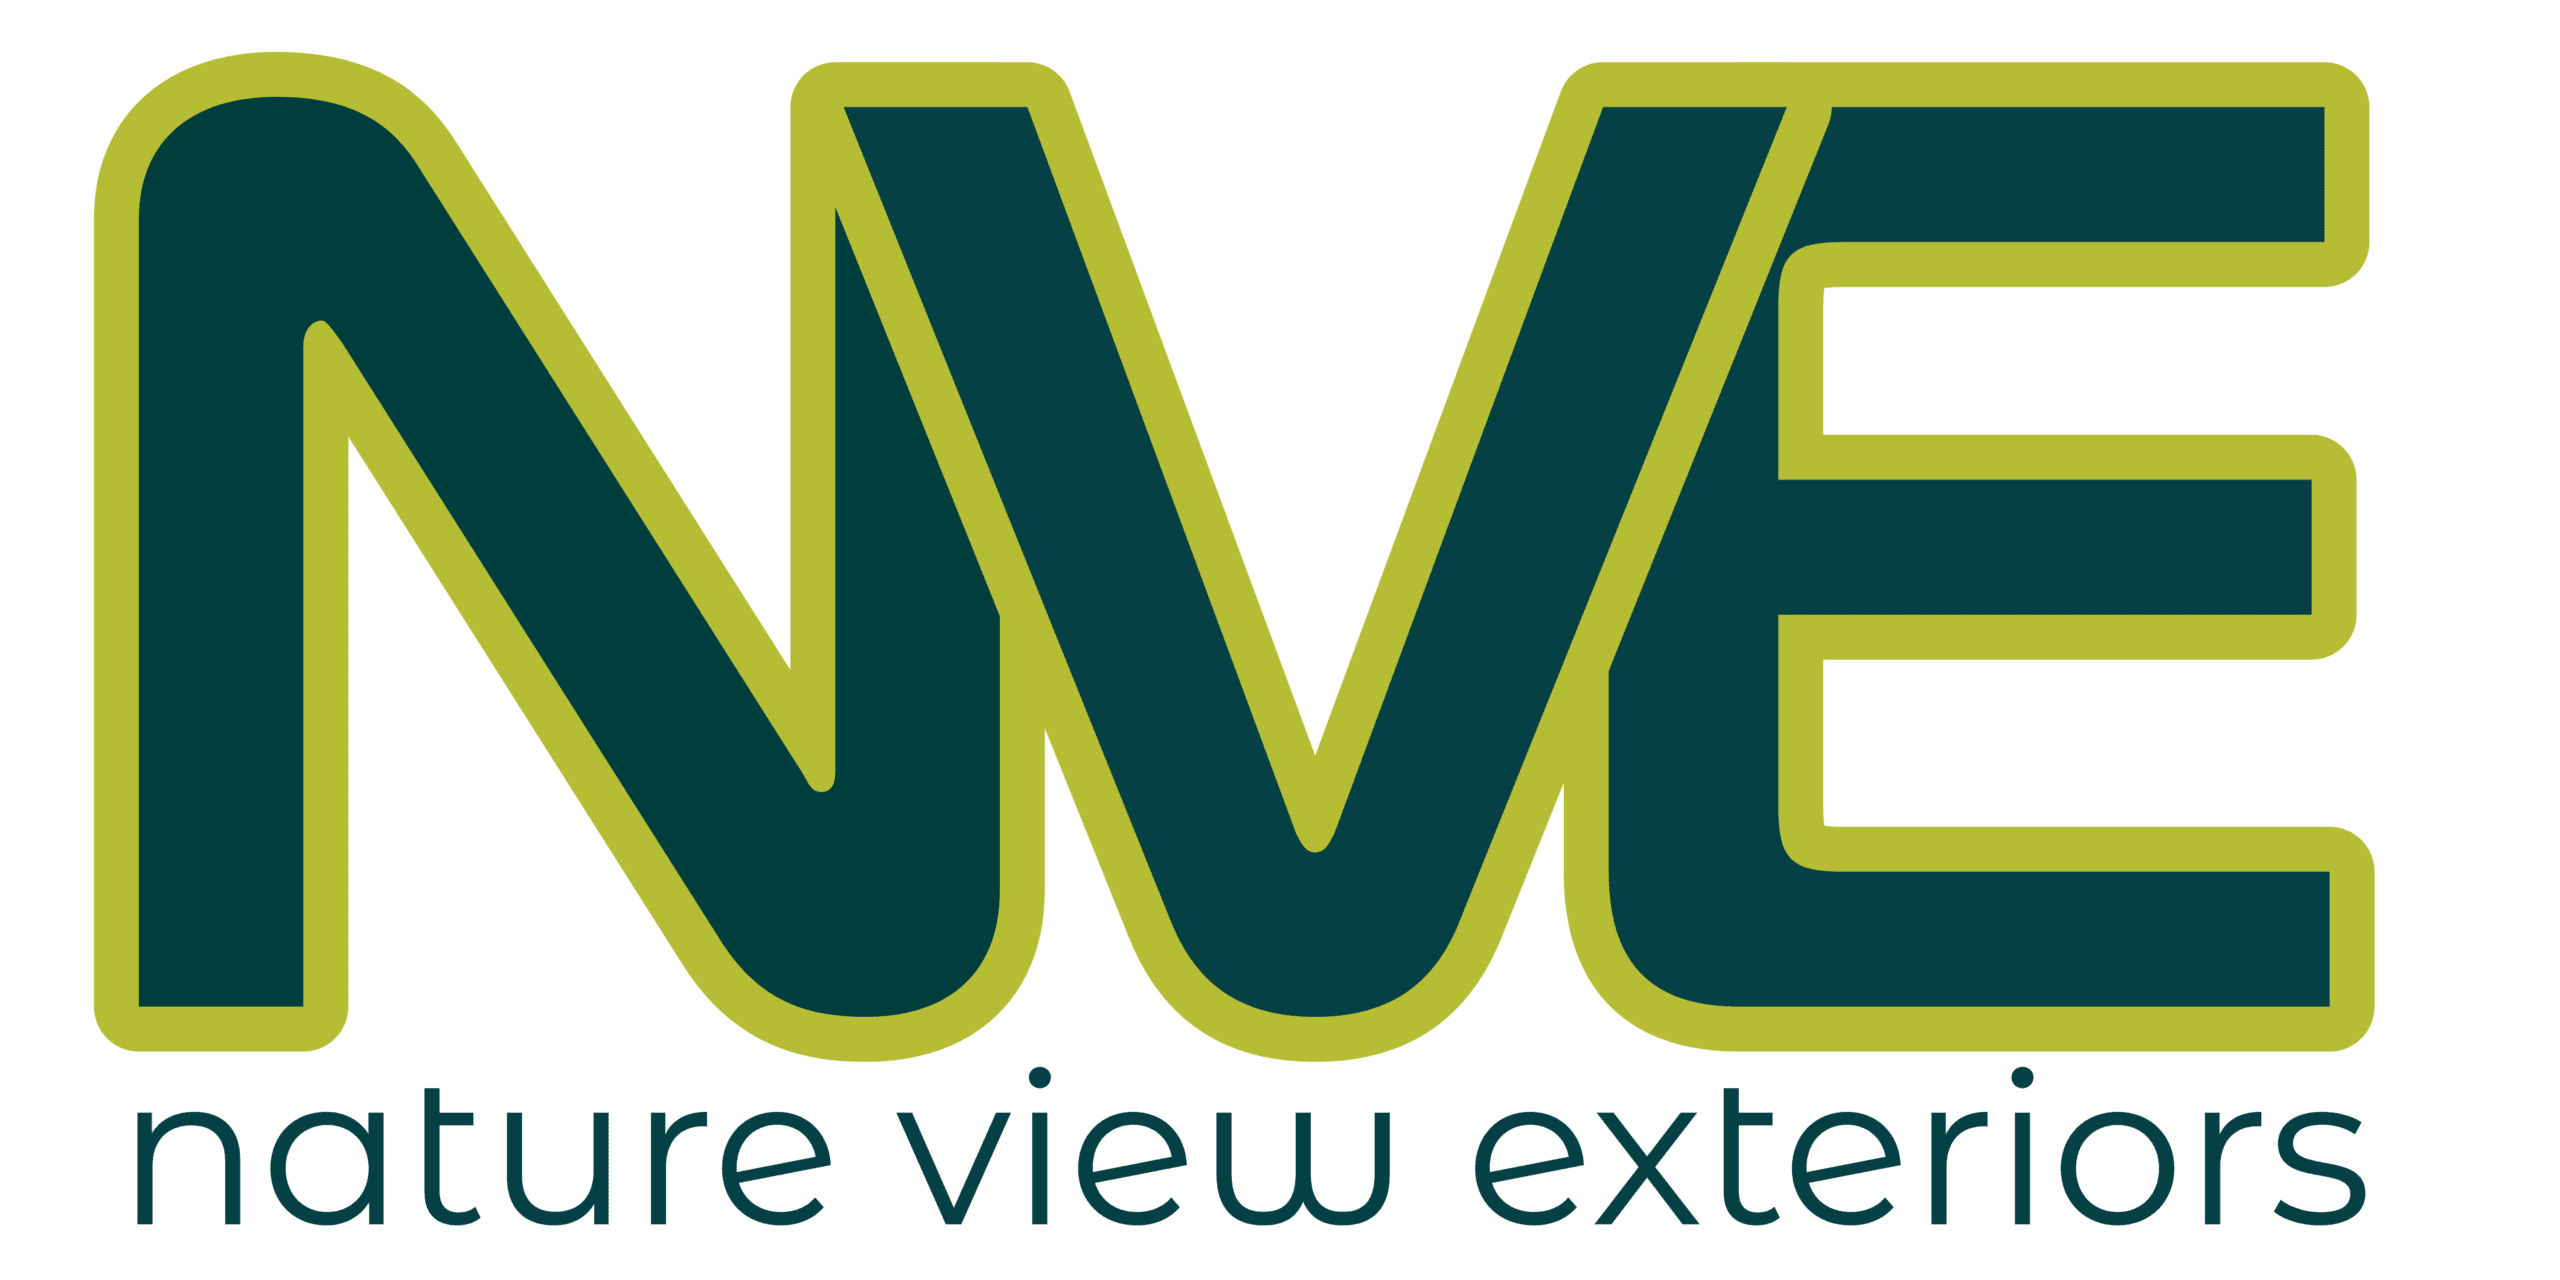 The image shows a logo for "NVE" with the text "nature view exteriors" below it. The logo features green and dark blue colors.